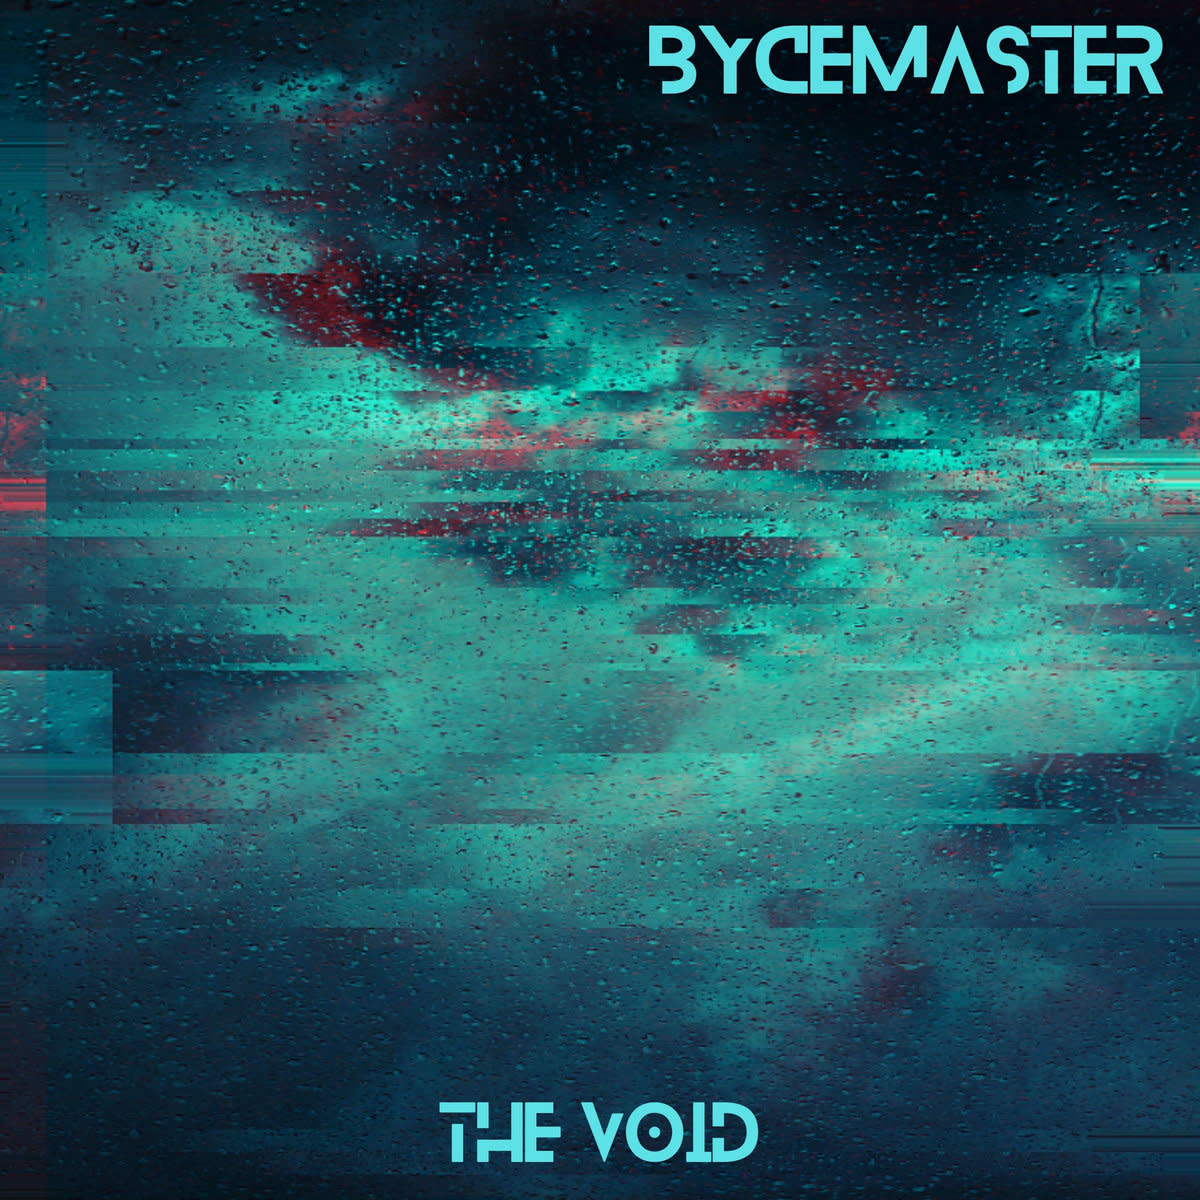 synth-single-review-the-void-by-bycemaster